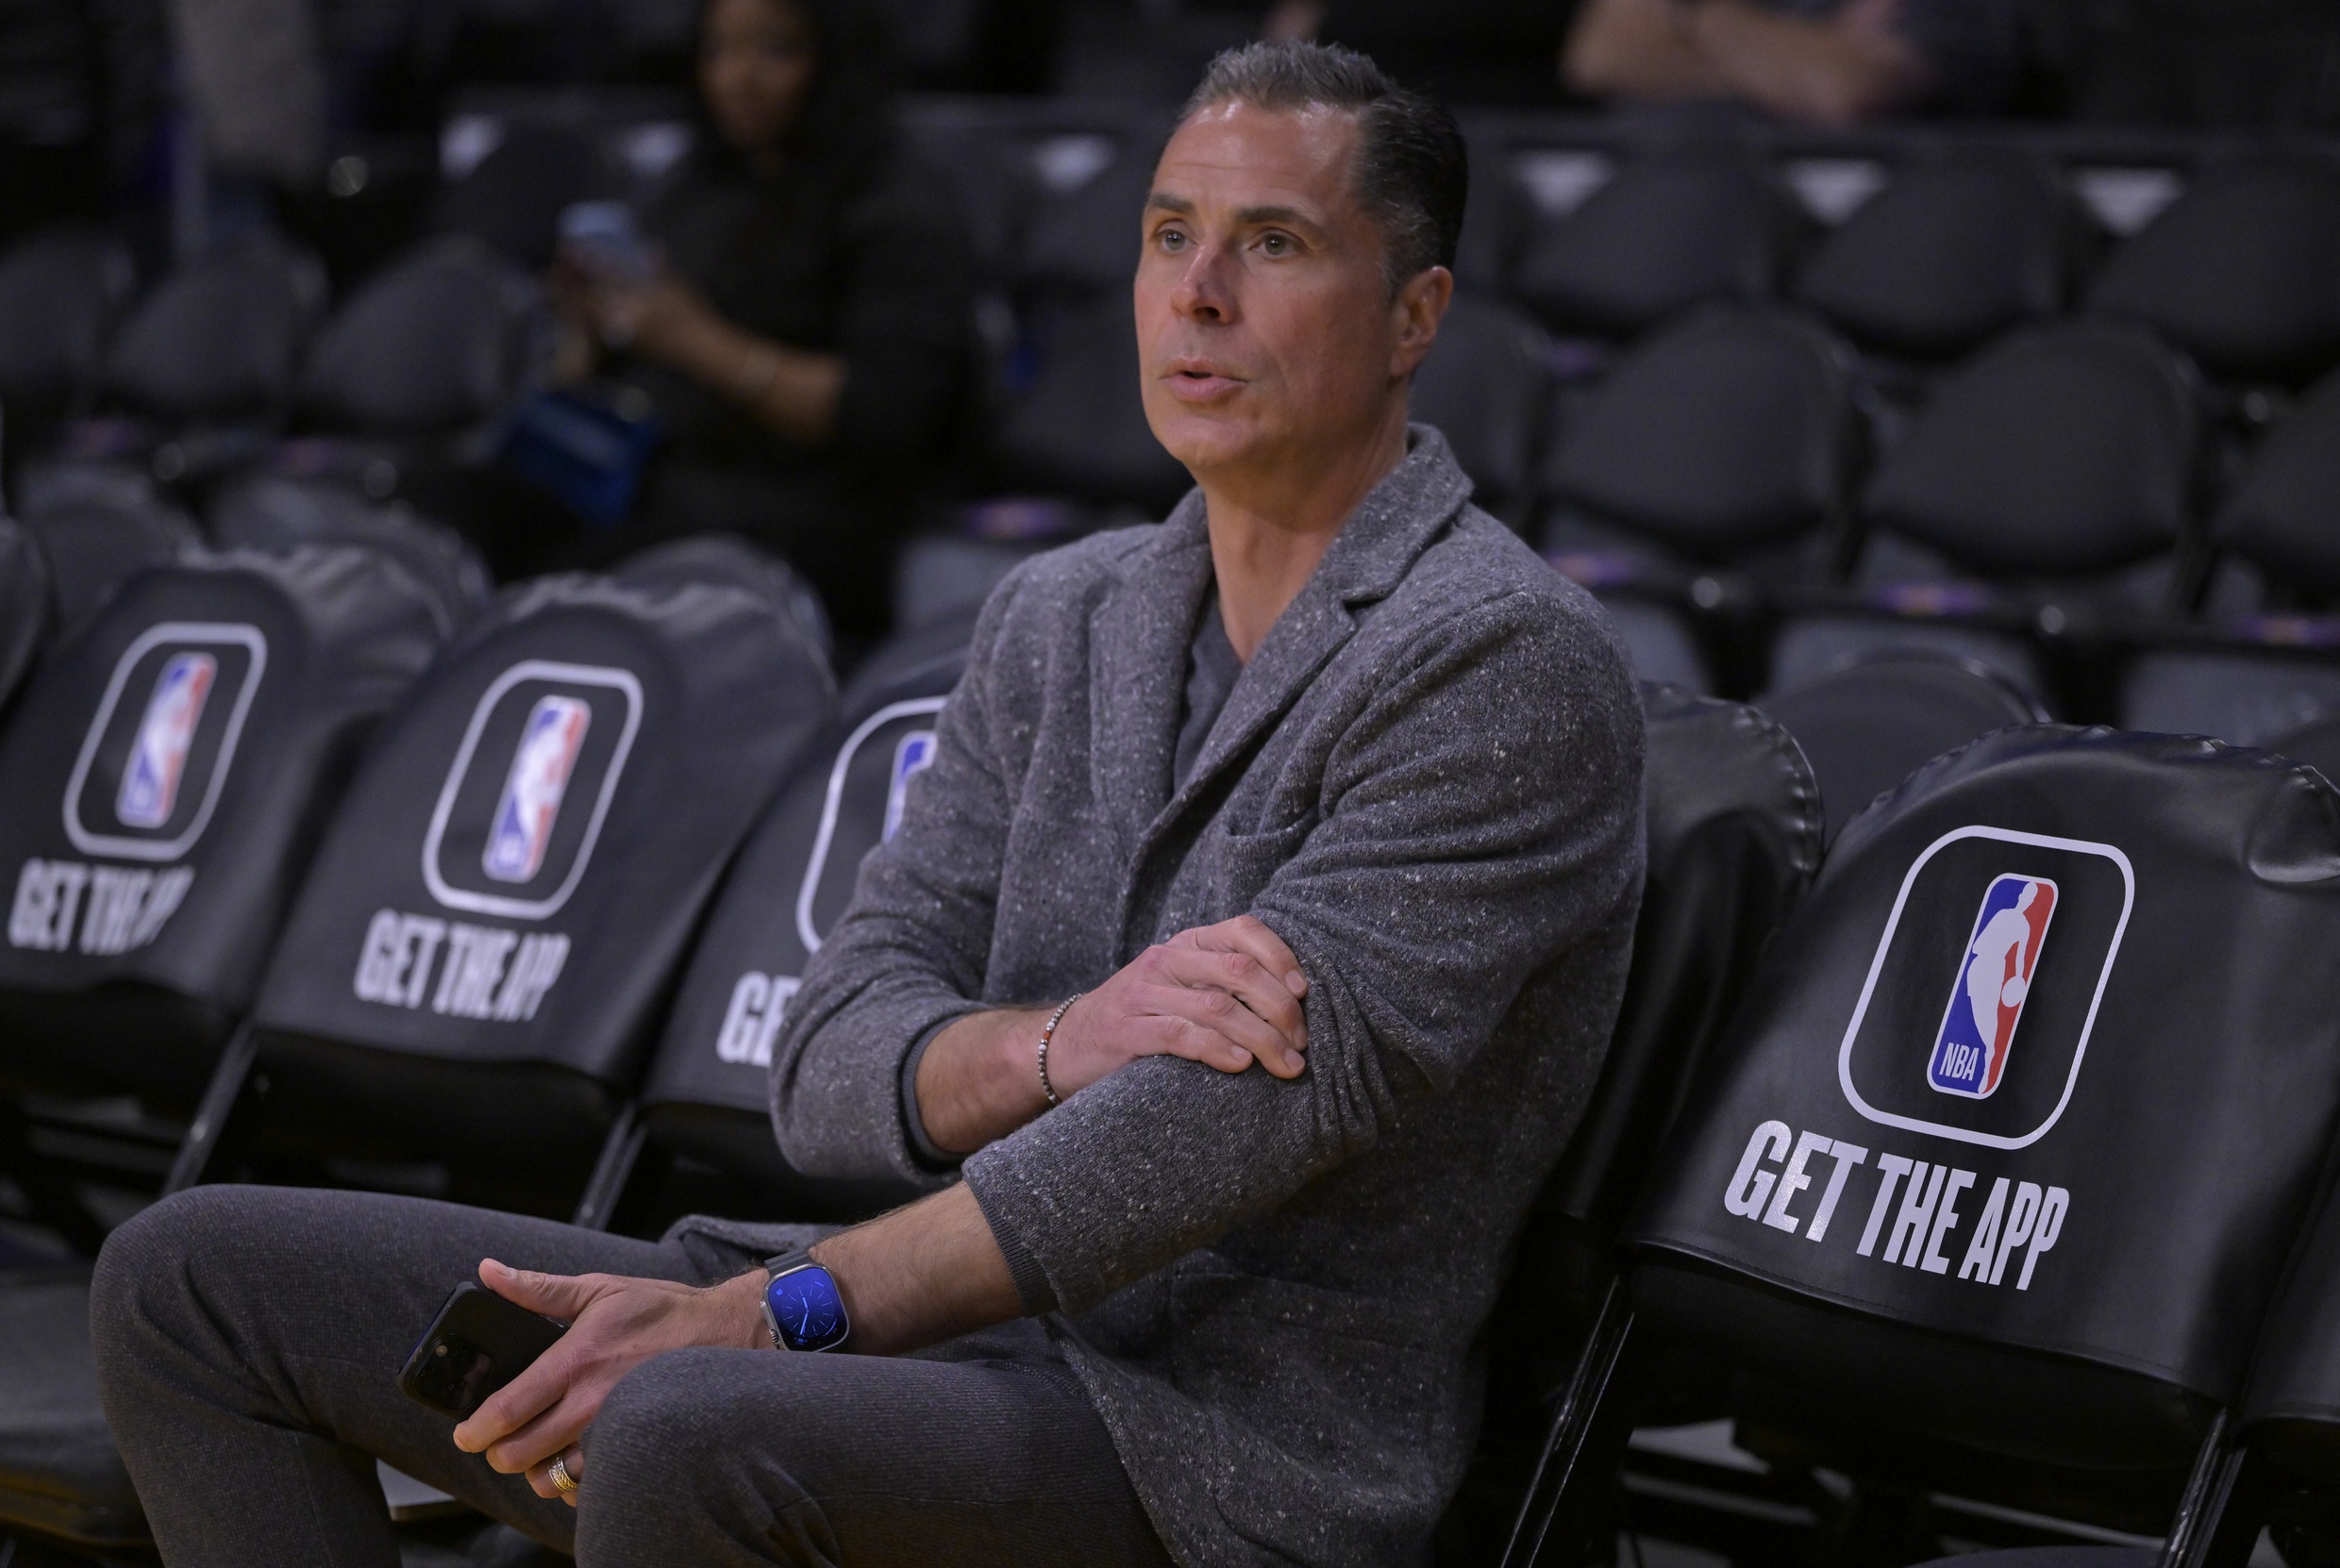 Mar 22, 2023; Los Angeles, California, USA; Rob Pelinka, Vice President of Operations watches players warm up prior to the game against the Phoenix Suns at Crypto.com Arena. Mandatory Credit: Jayne Kamin-Oncea-USA TODAY Sports